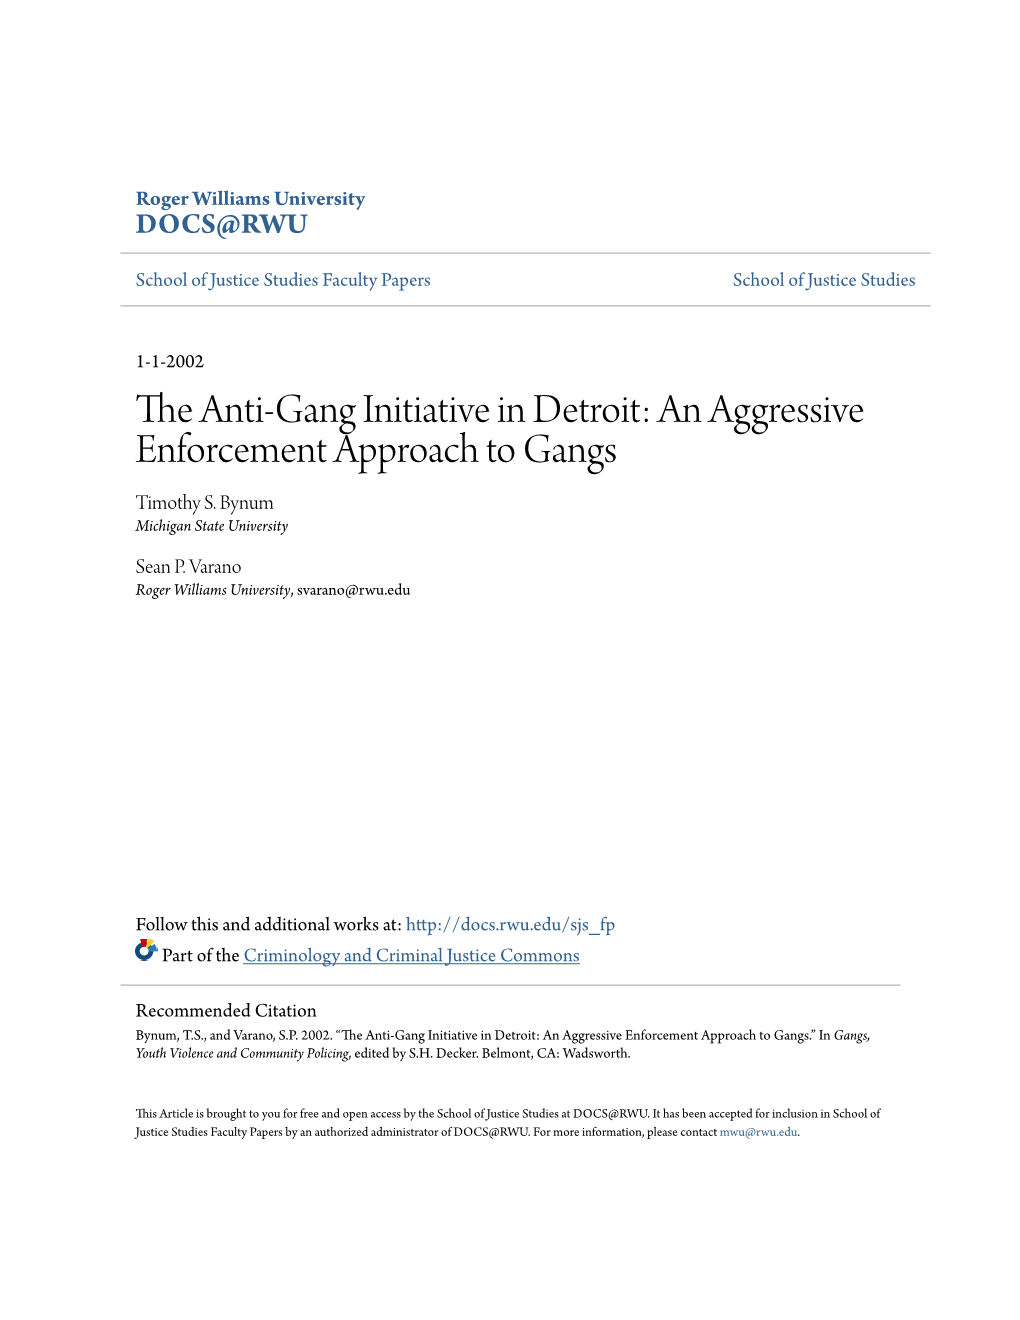 The Anti-Gang Initiative in Detroit: an Aggressive Enforcement Approach to Gangs Timothy S